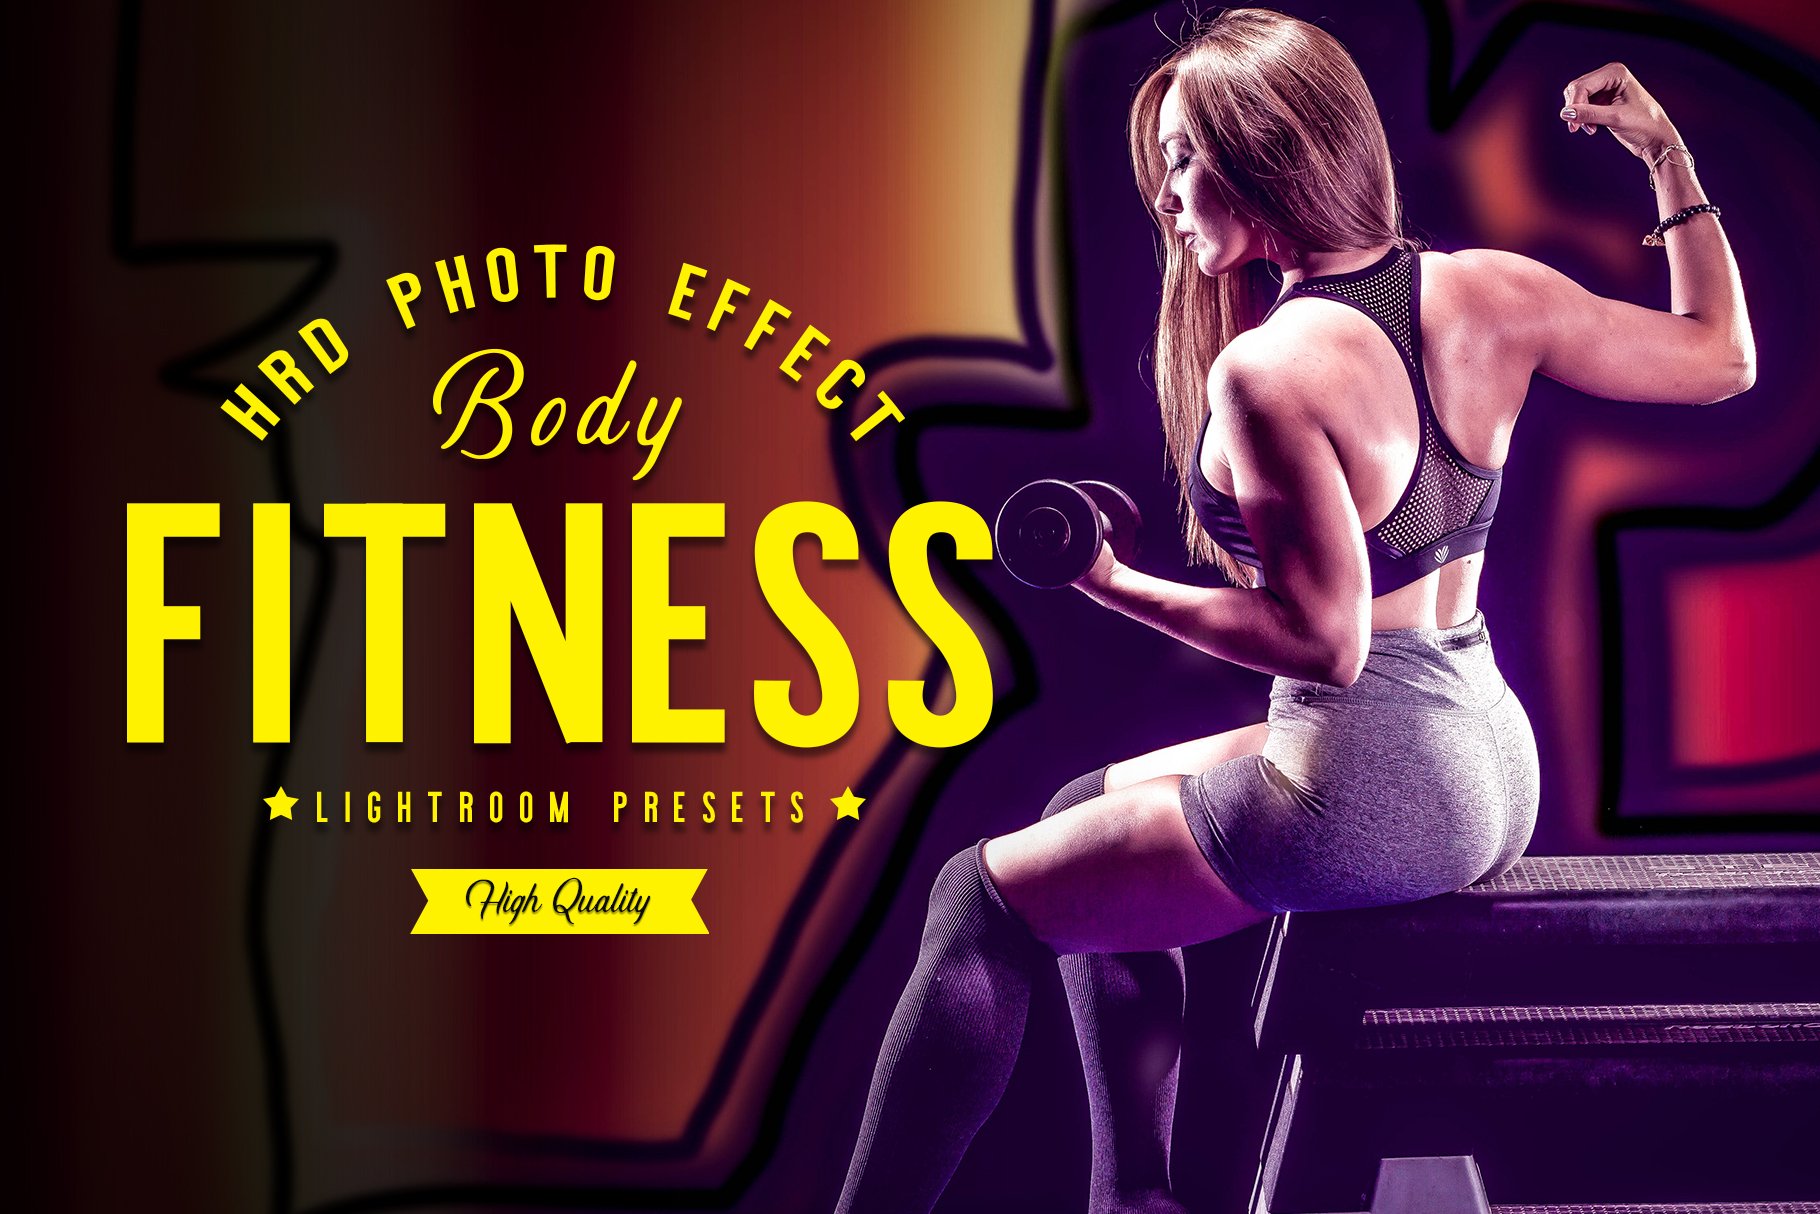 Body Fitness Lightroom Presetscover image.